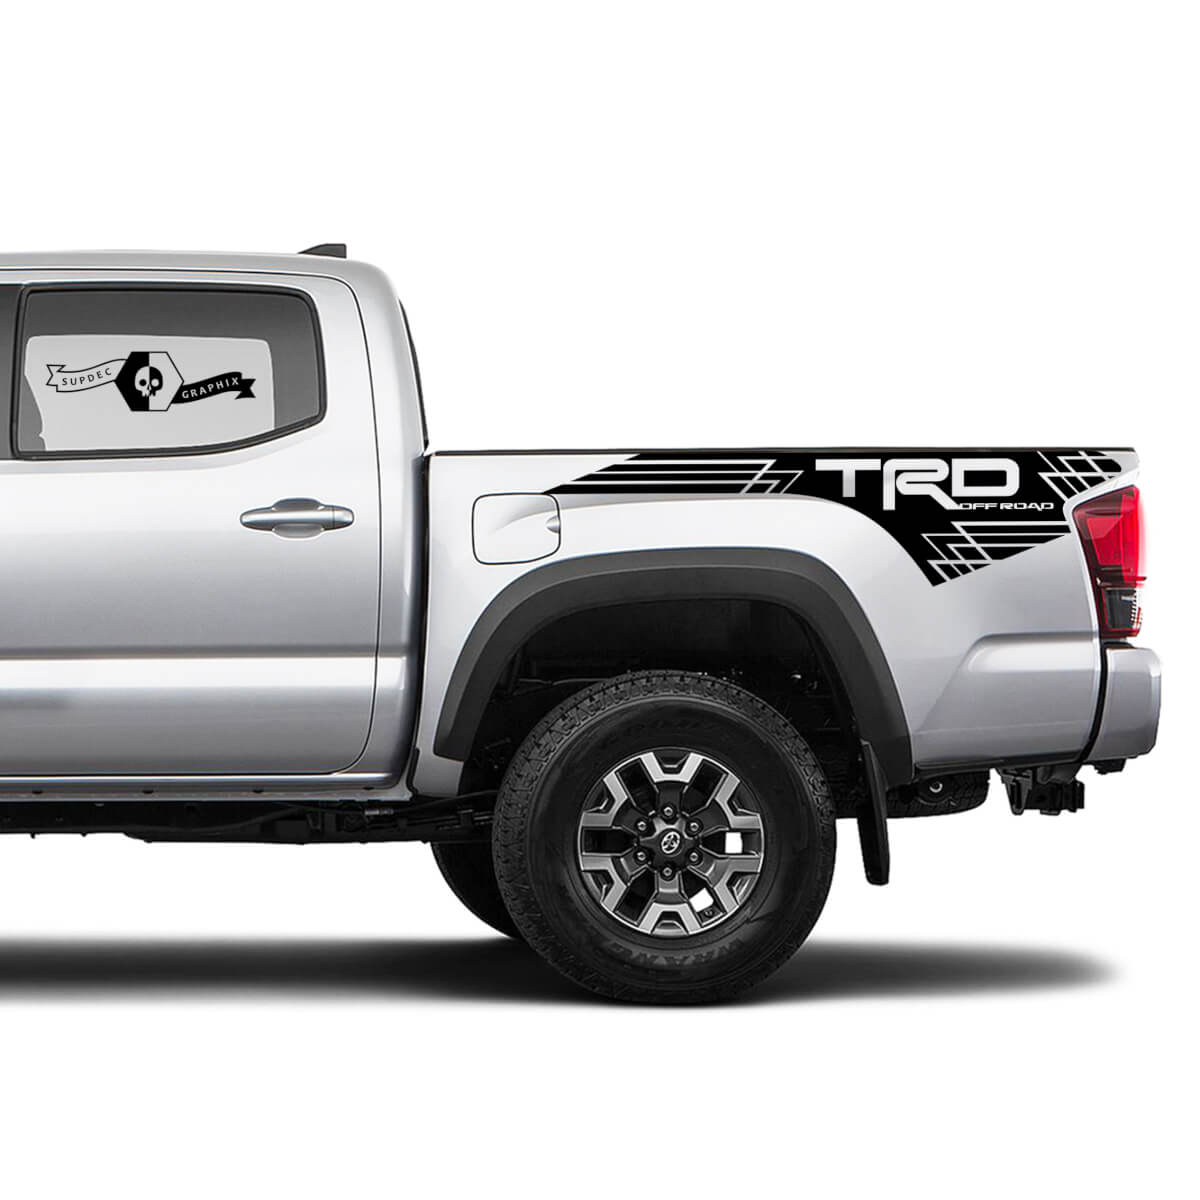 TRD Toyota Racing Development BedSide Z stripes Decals Stickers for Tacoma